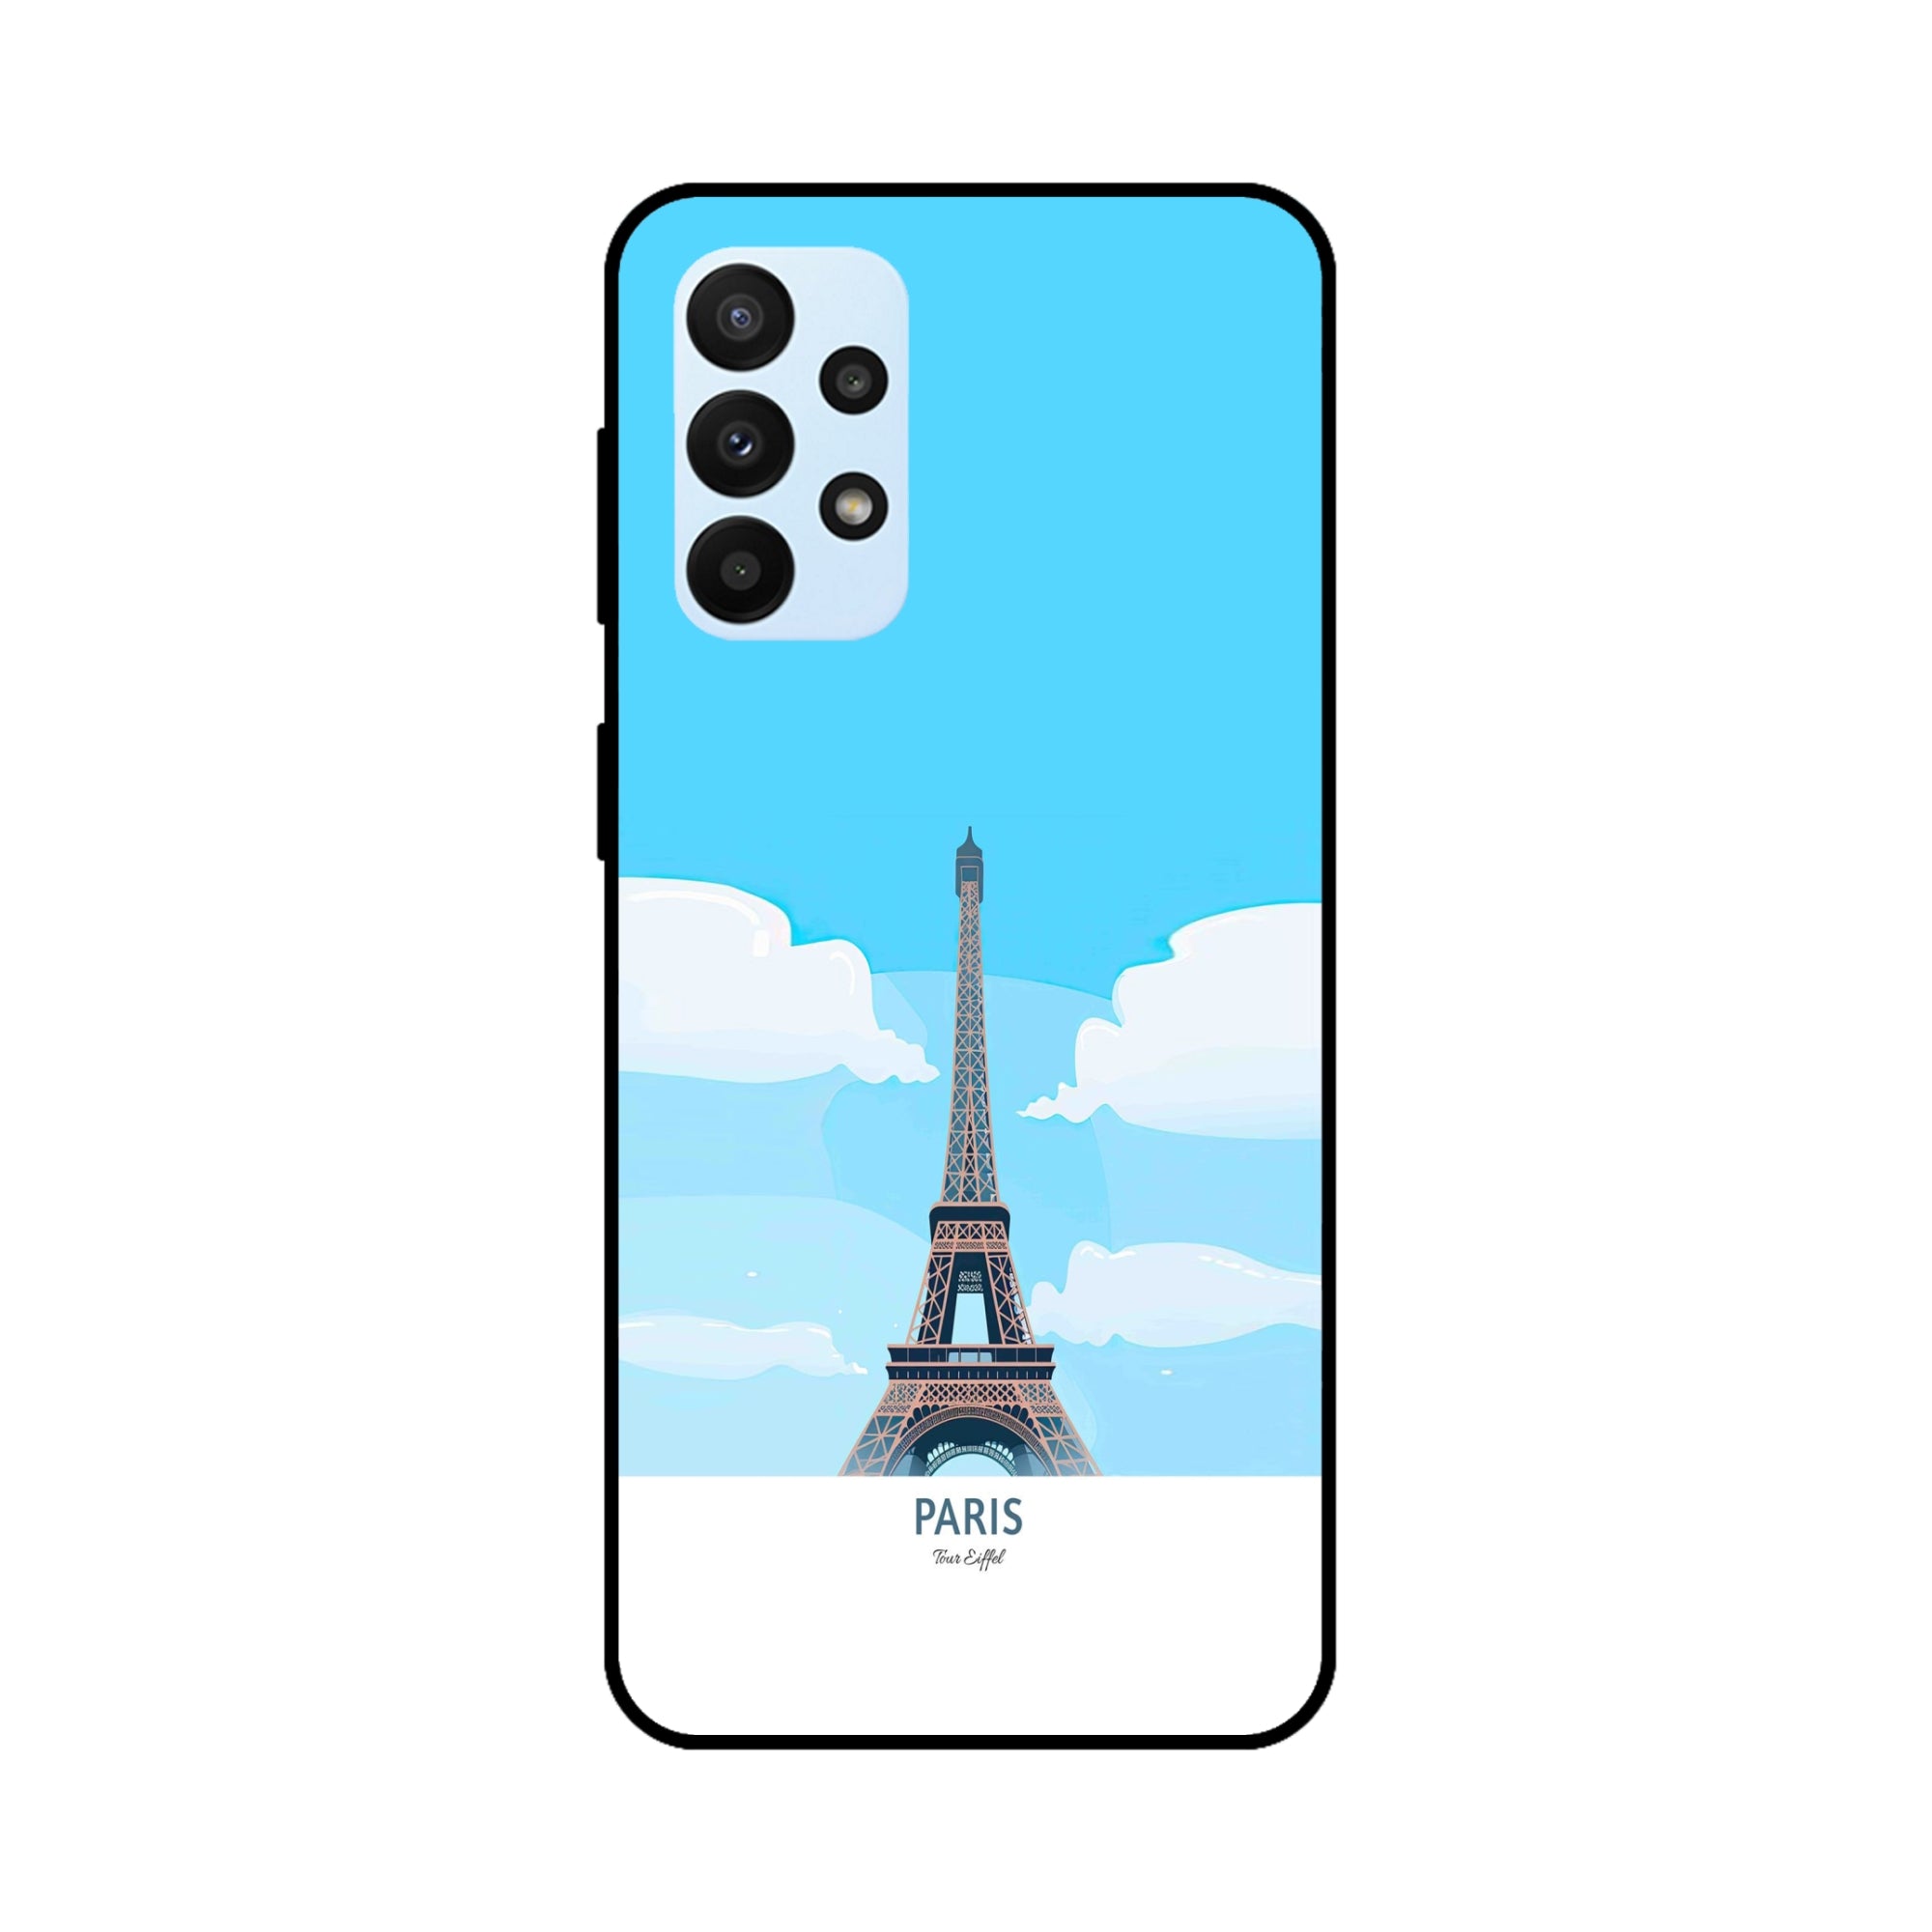 Buy Paris Metal-Silicon Back Mobile Phone Case/Cover For Samsung Galaxy A72 Online